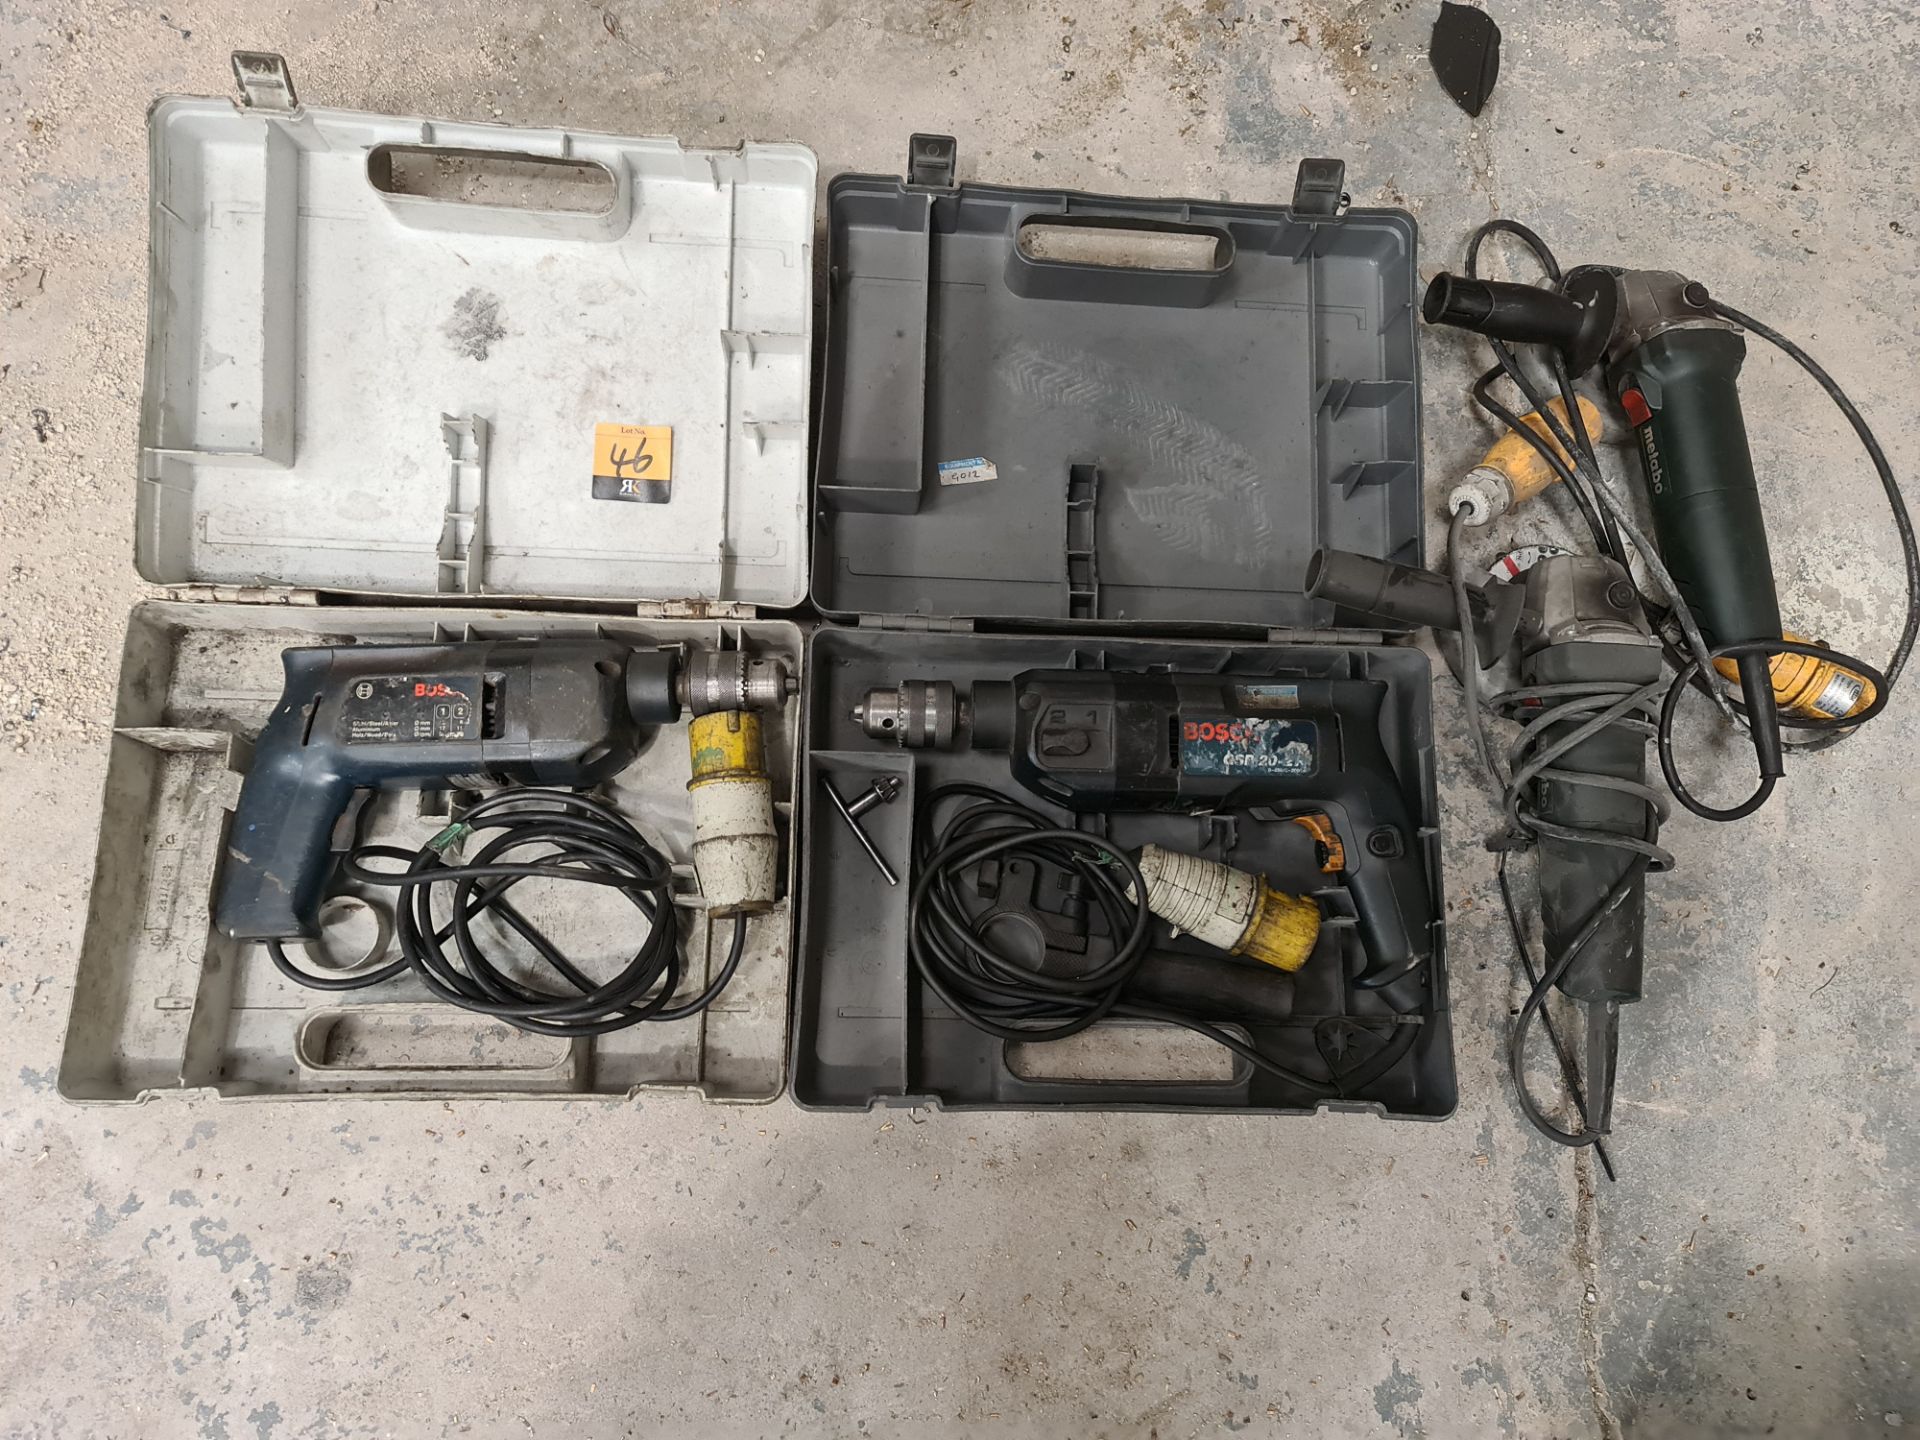 4 off assorted 110V power tools